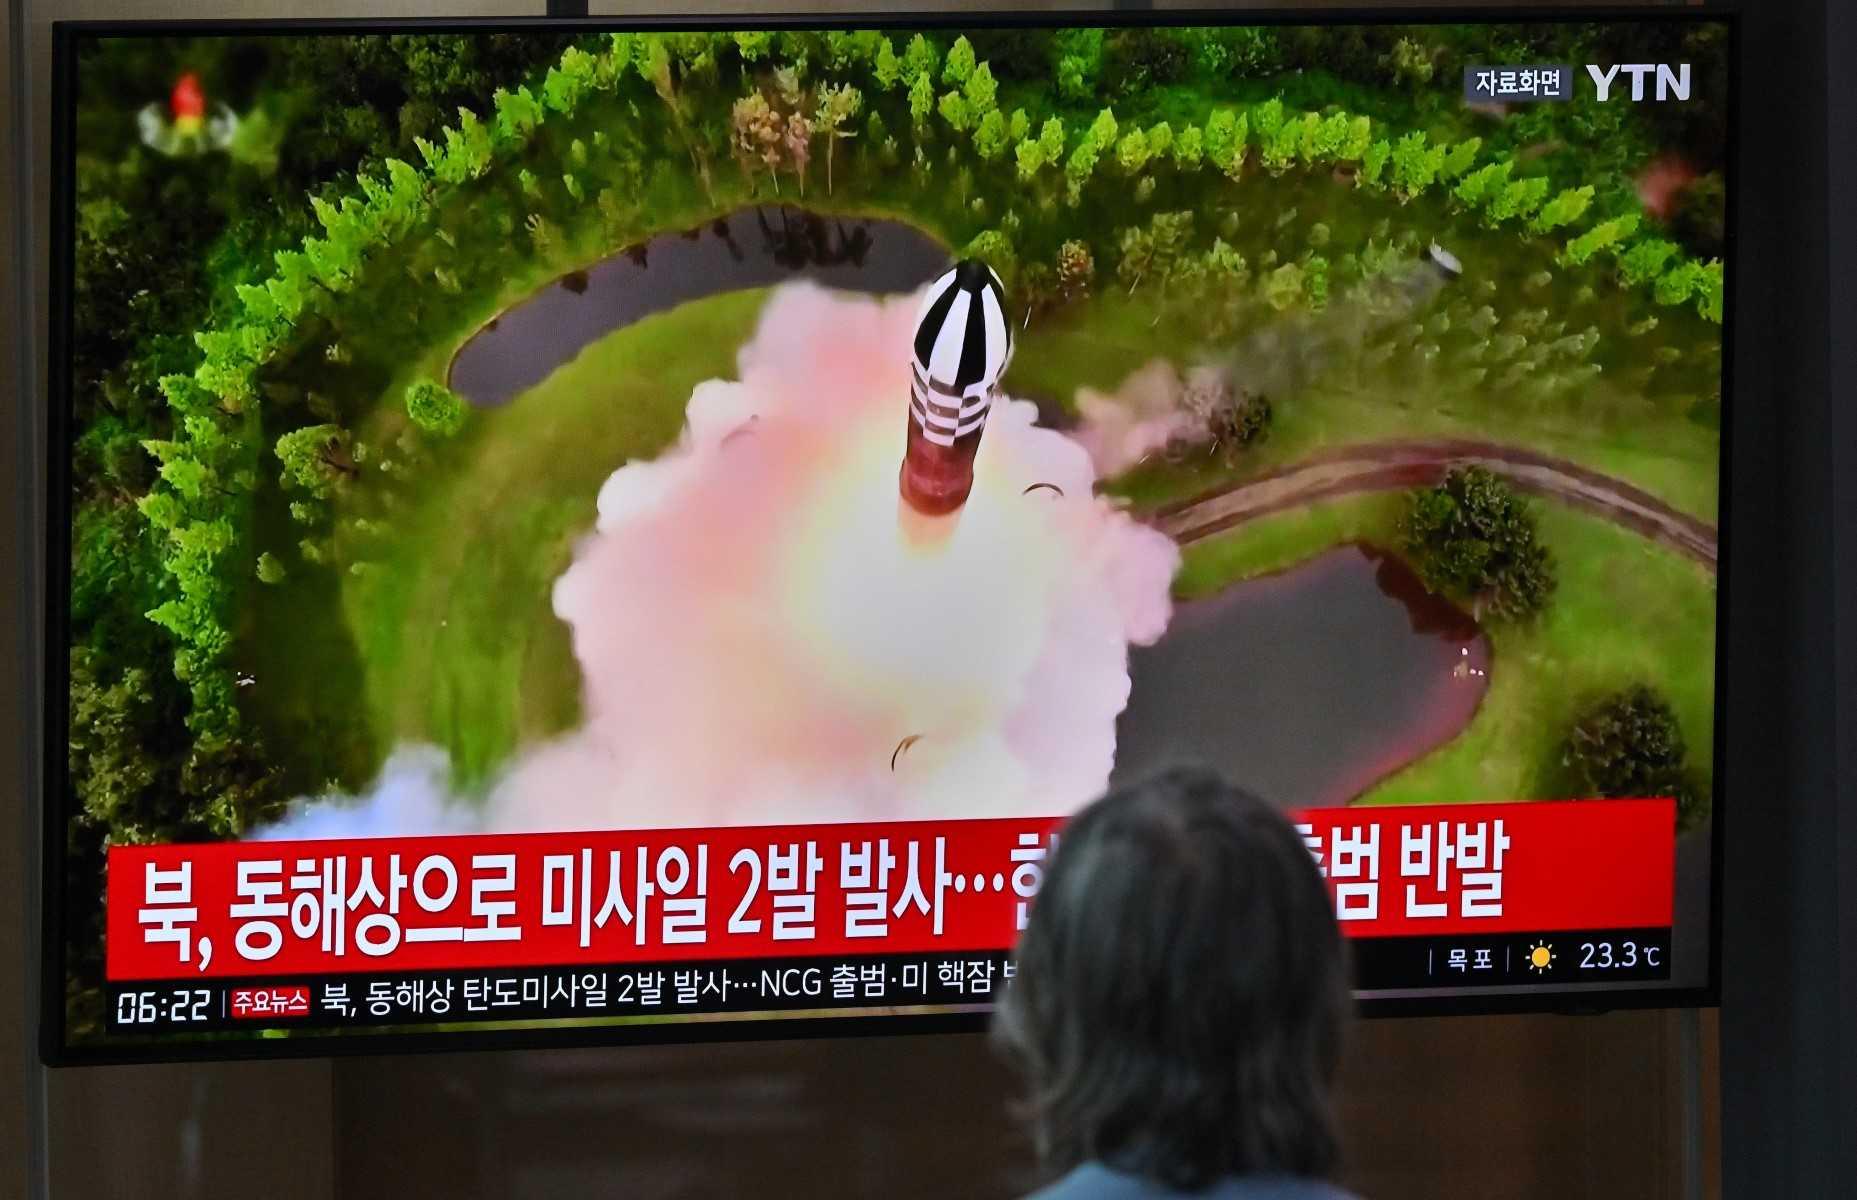 A man watches a television screen showing a news broadcast with file footage of a North Korean missile test, at a railway station in Seoul on July 19. Photo: AFP